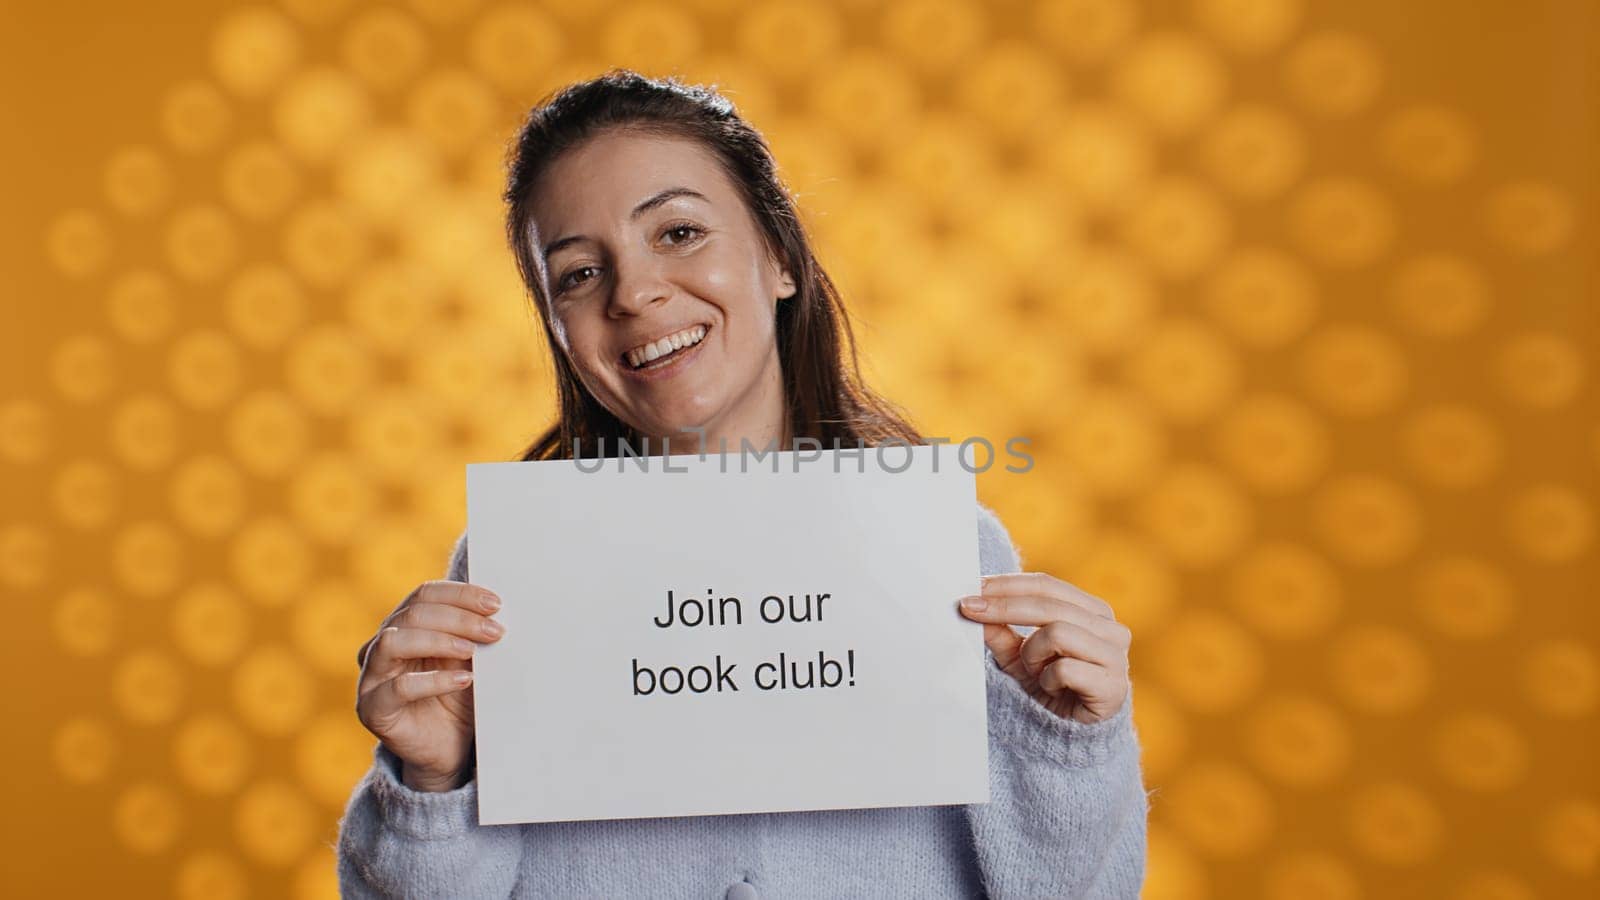 Cheerful book club president holds message urging people to join them, talking about importance of lecture, studio background. Smiling woman inviting bookworms to enlist in her association, camera B